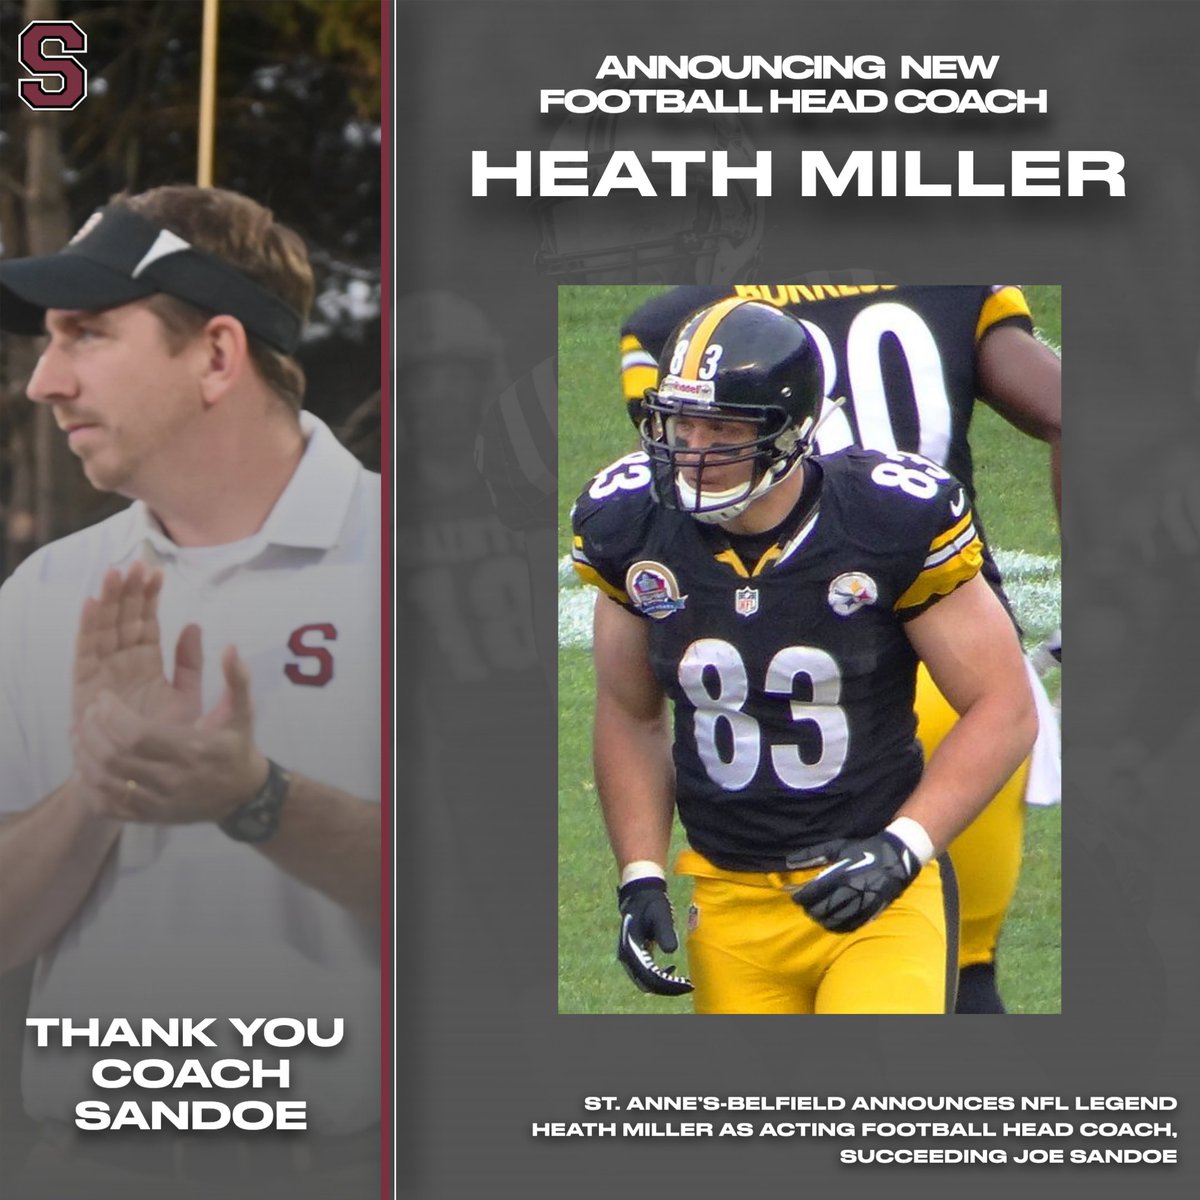 St. Anne’s-Belfield is thrilled to announce that NFL champion and Pittsburgh Steelers star, Heath Miller, P. ’28, ’29, ’31, & ’33, will be the acting head coach for Saints Football in the 2024-25 season. stab.org/fs/comms-manag…